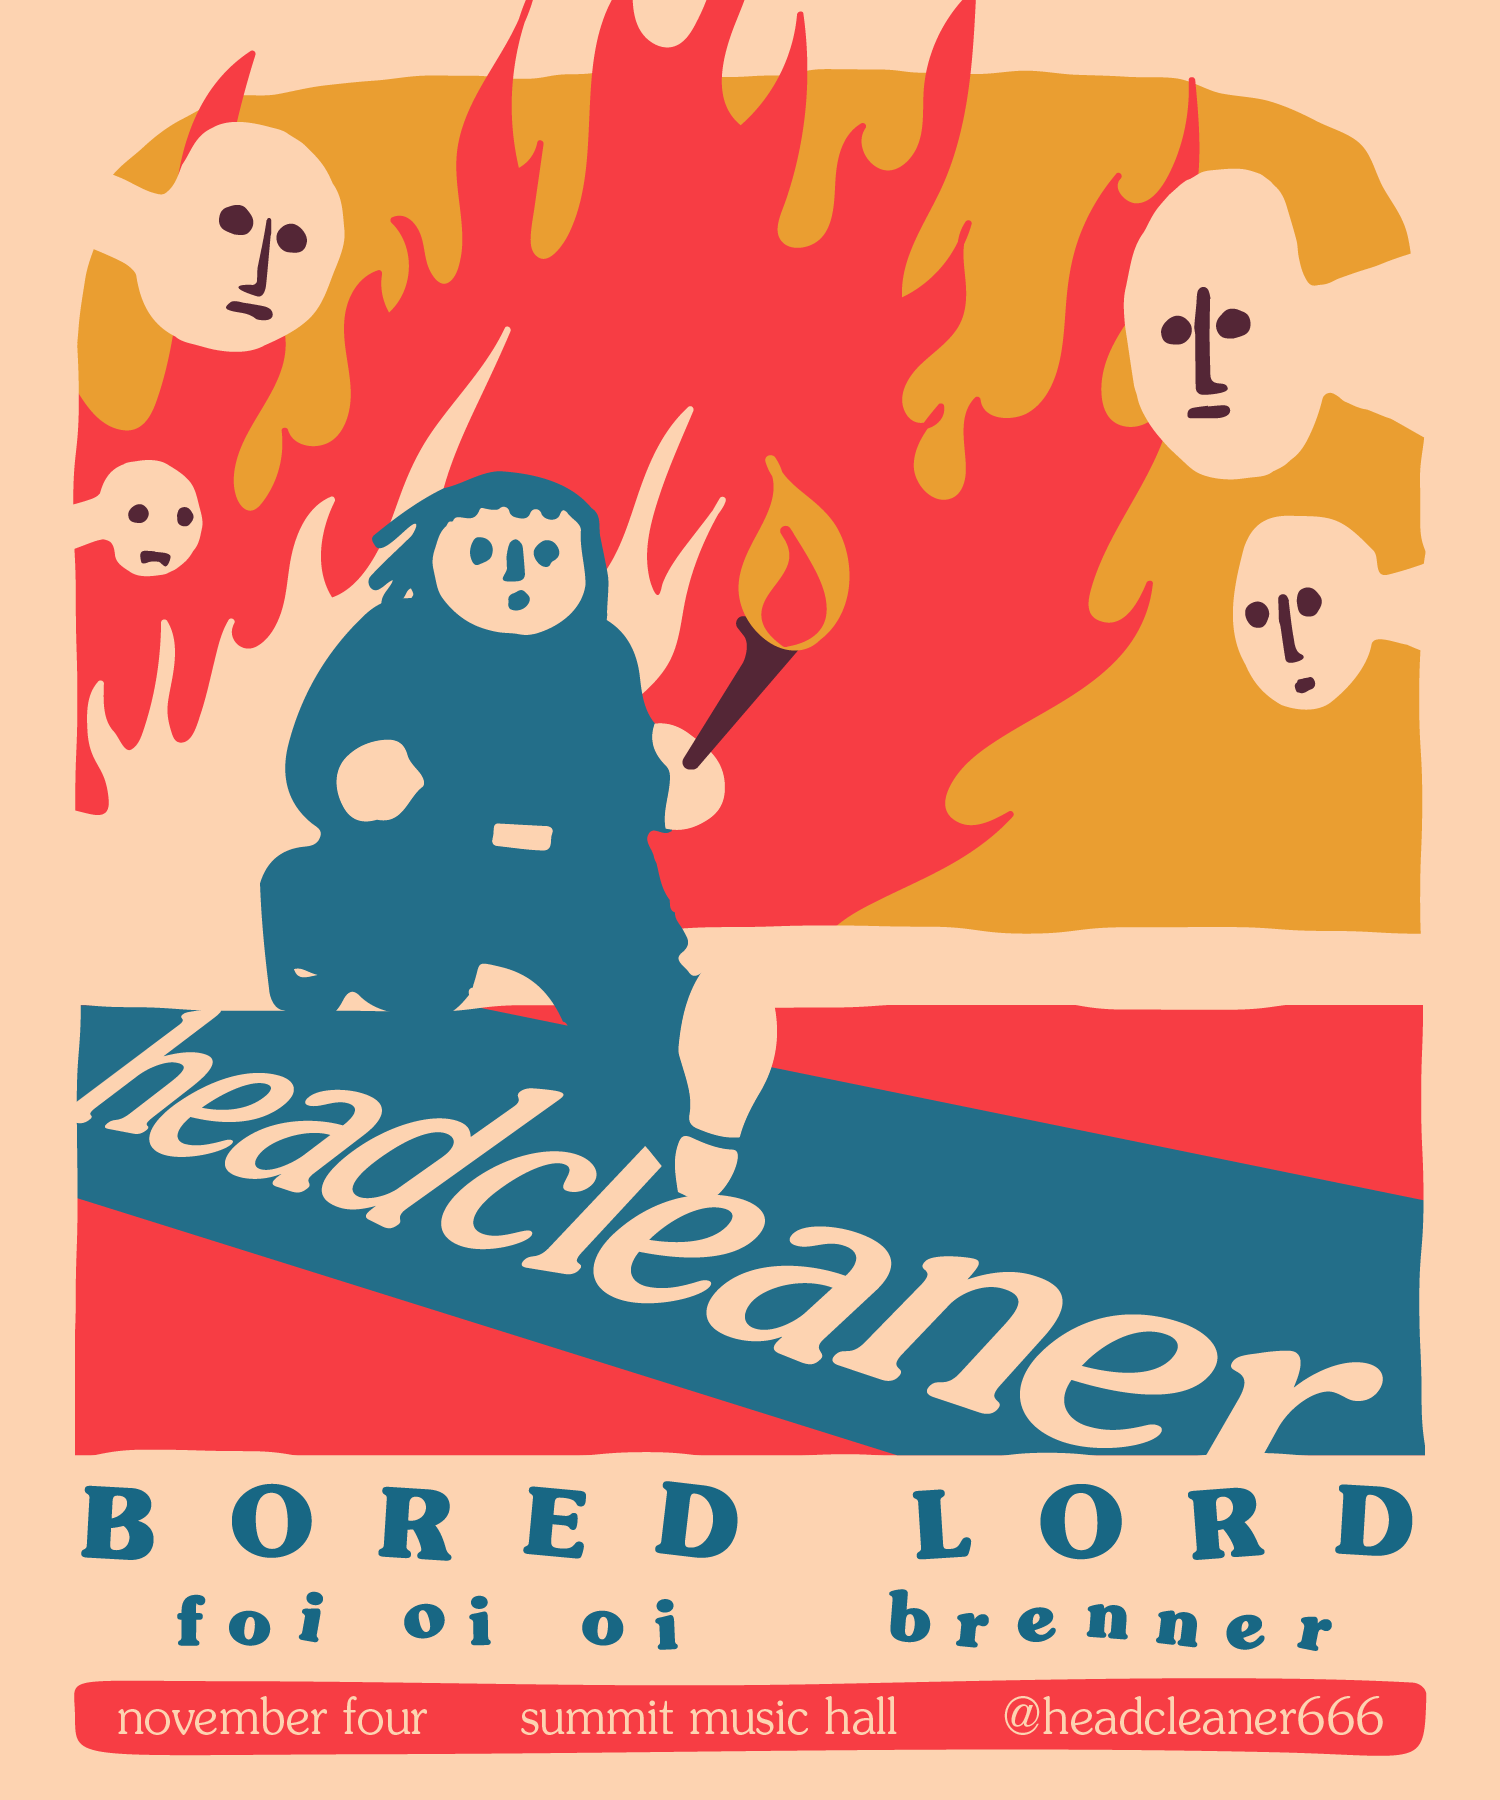 Headcleaner - Bored Lord - Página frontal